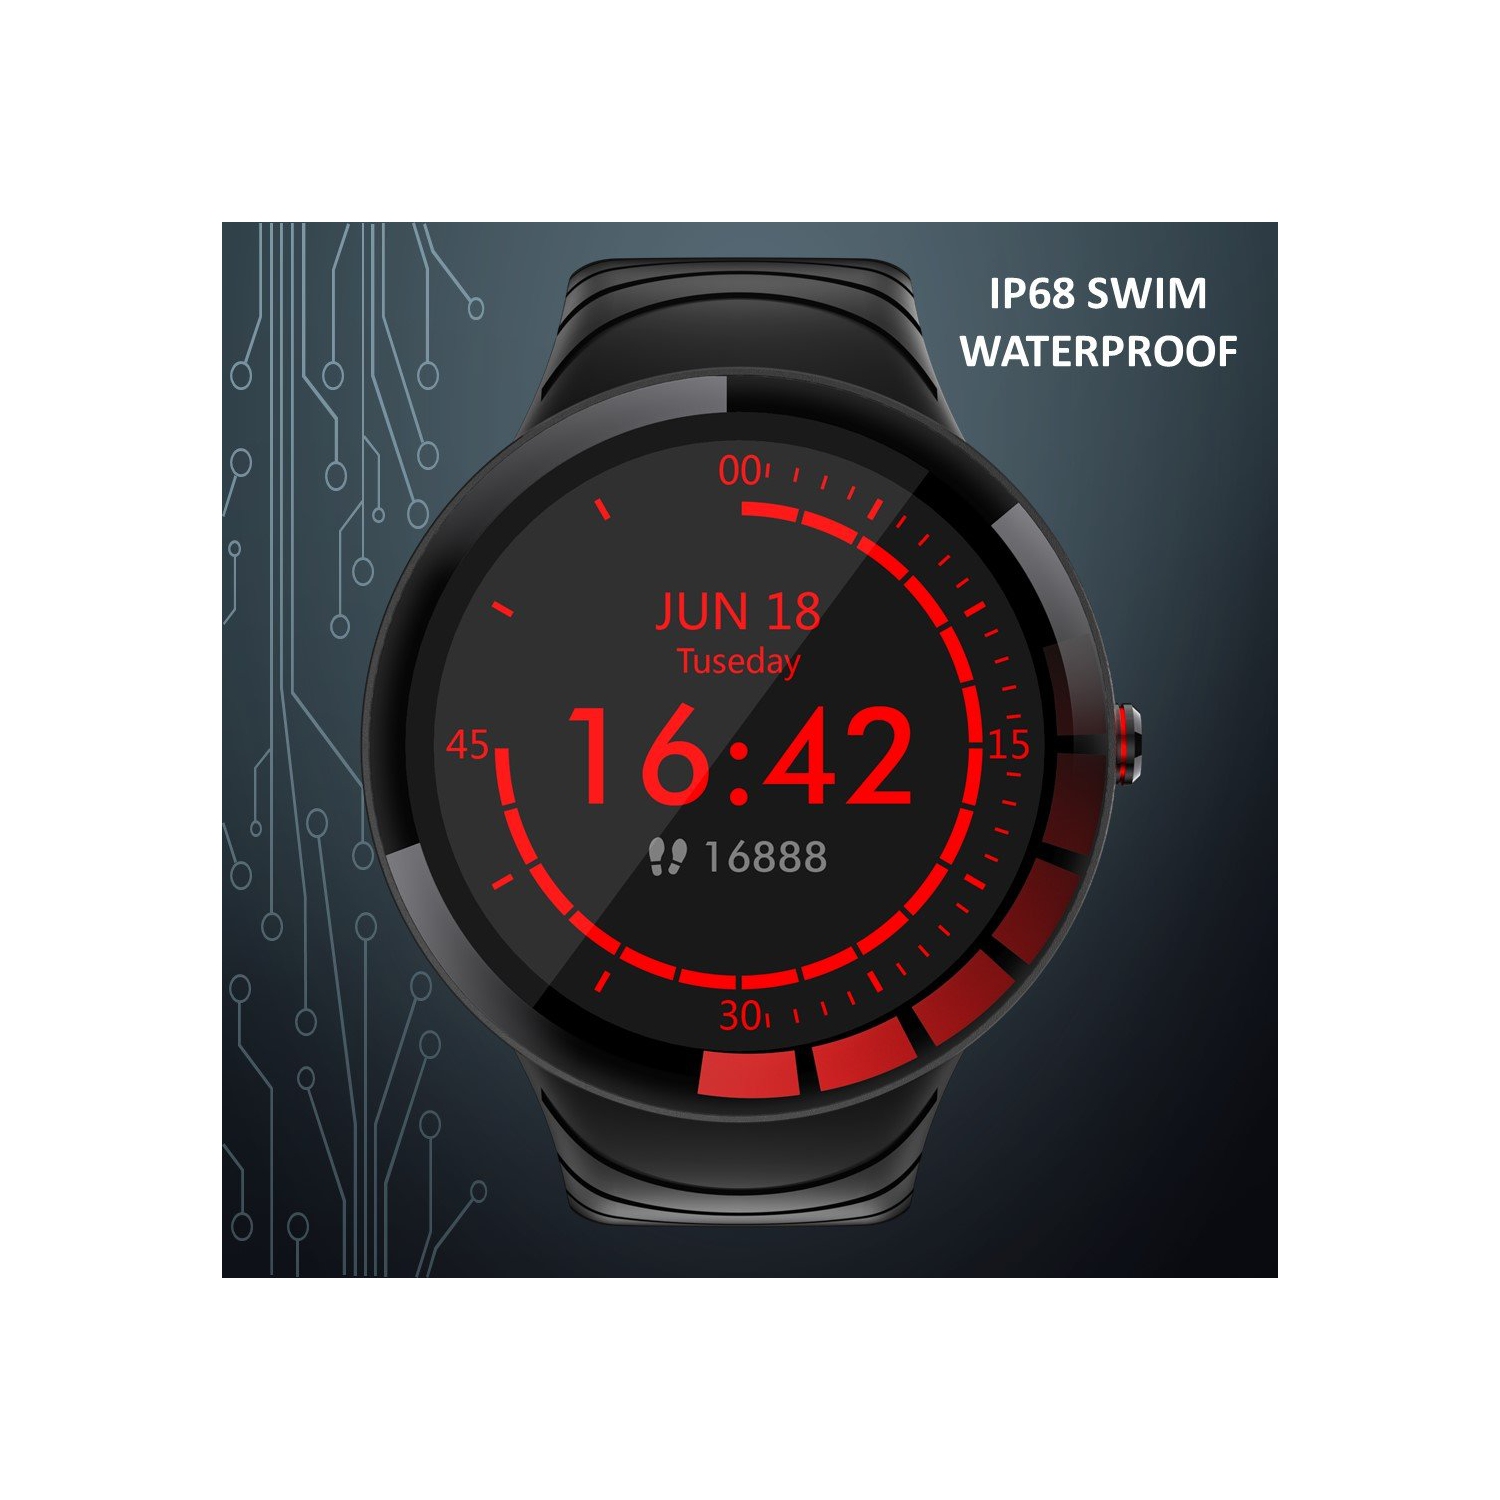 ISPEKTRUM Rnoir Smartwatch 1.3" Screen, Swim Waterproof, Sports Mode Fitness Tracker Heart Rate & BP Monitor, Bluetooth Text Call Notification works with Android IOS iPhone Samsung